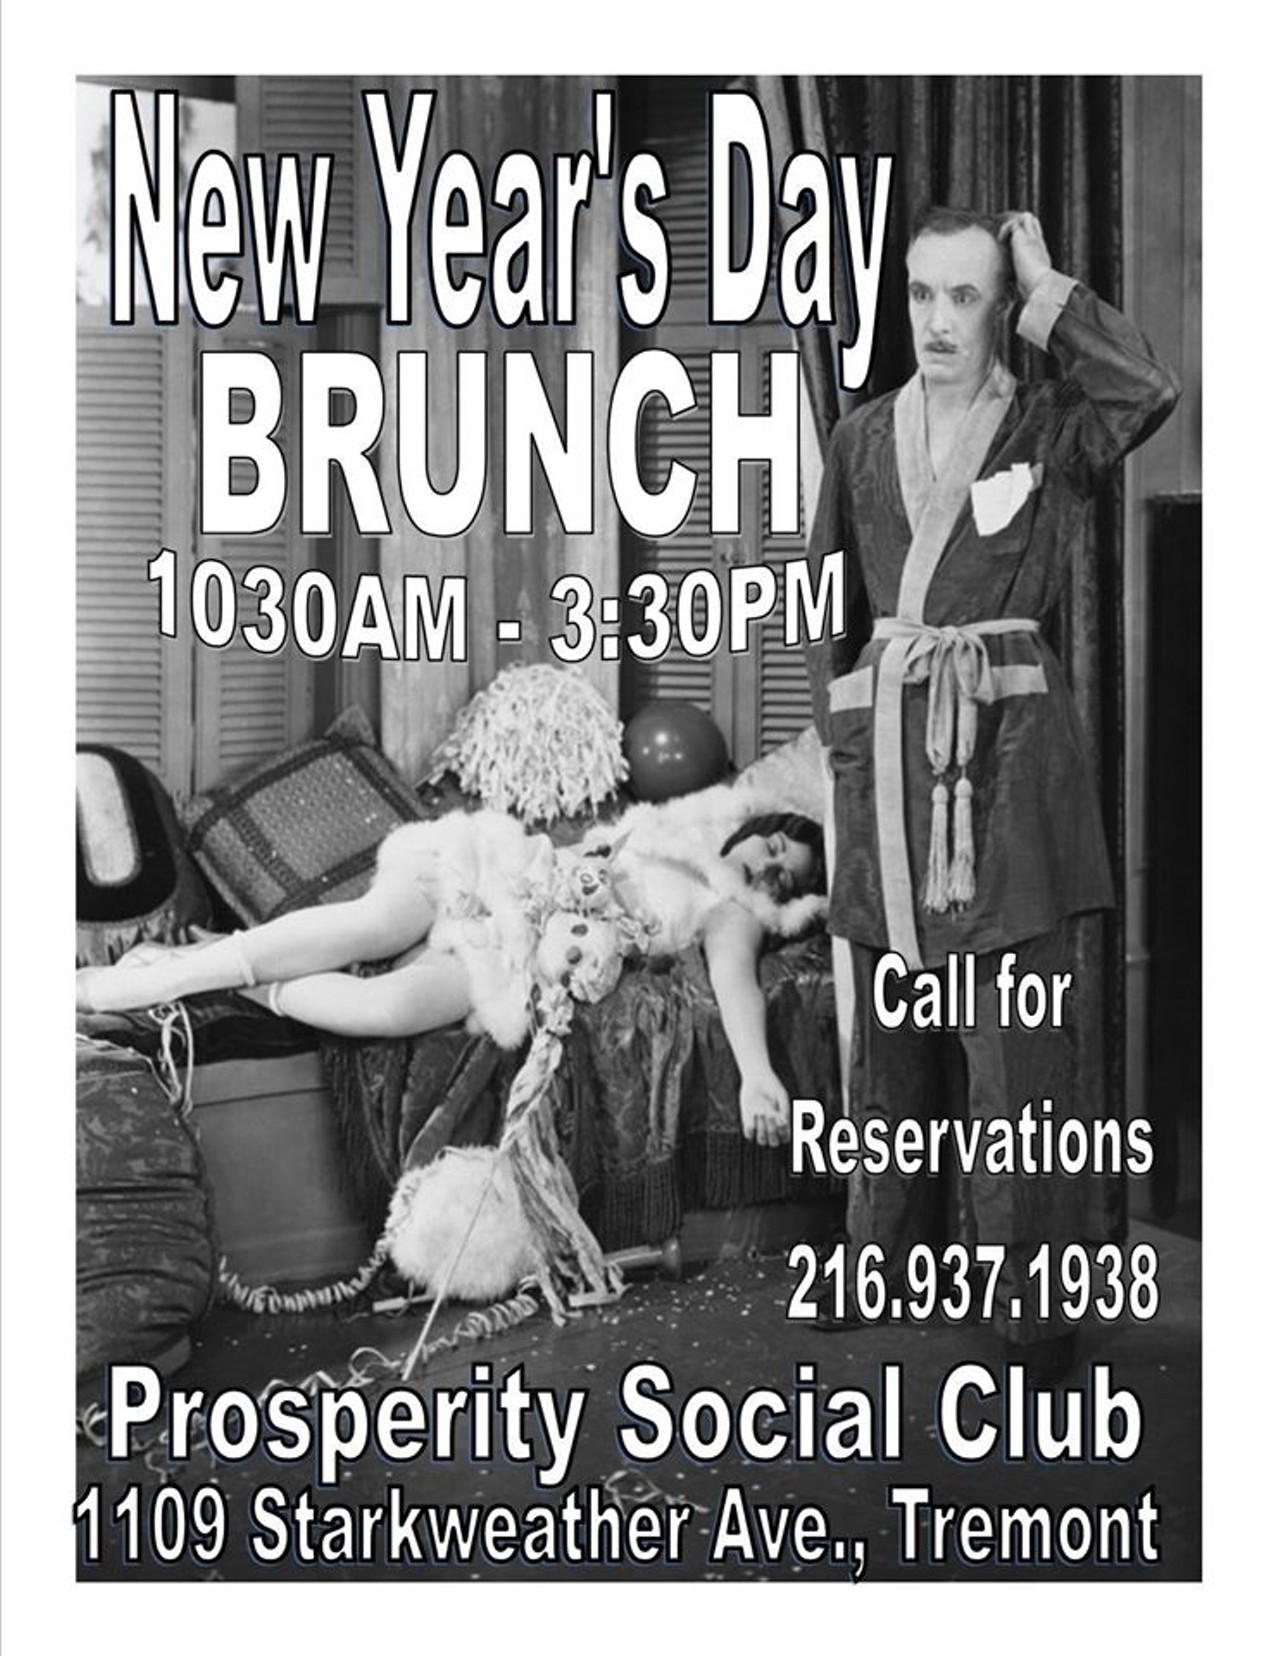 Hash After the Bash Brunch 
When: Sun., Jan. 1
Anyone recovering from a wild night out on the two to celebrate New Year&#146;s Eve will undoubtedly find solace in Prosperity Social Club&#146;s Hash After the Bash Brunch, an event designed to provide the kind of &#147;camaraderie, carbs, coffee and cocktails&#148; needed to start the new year off right. And given that many bars and restaurants are closed New Year&#146;s Day, it&#146;s good to know that at least one place in town has got you covered. Brunch runs from 10:30 a.m. to 3:30 p.m. (Courtesy Prosperity Social Club/Facebook)